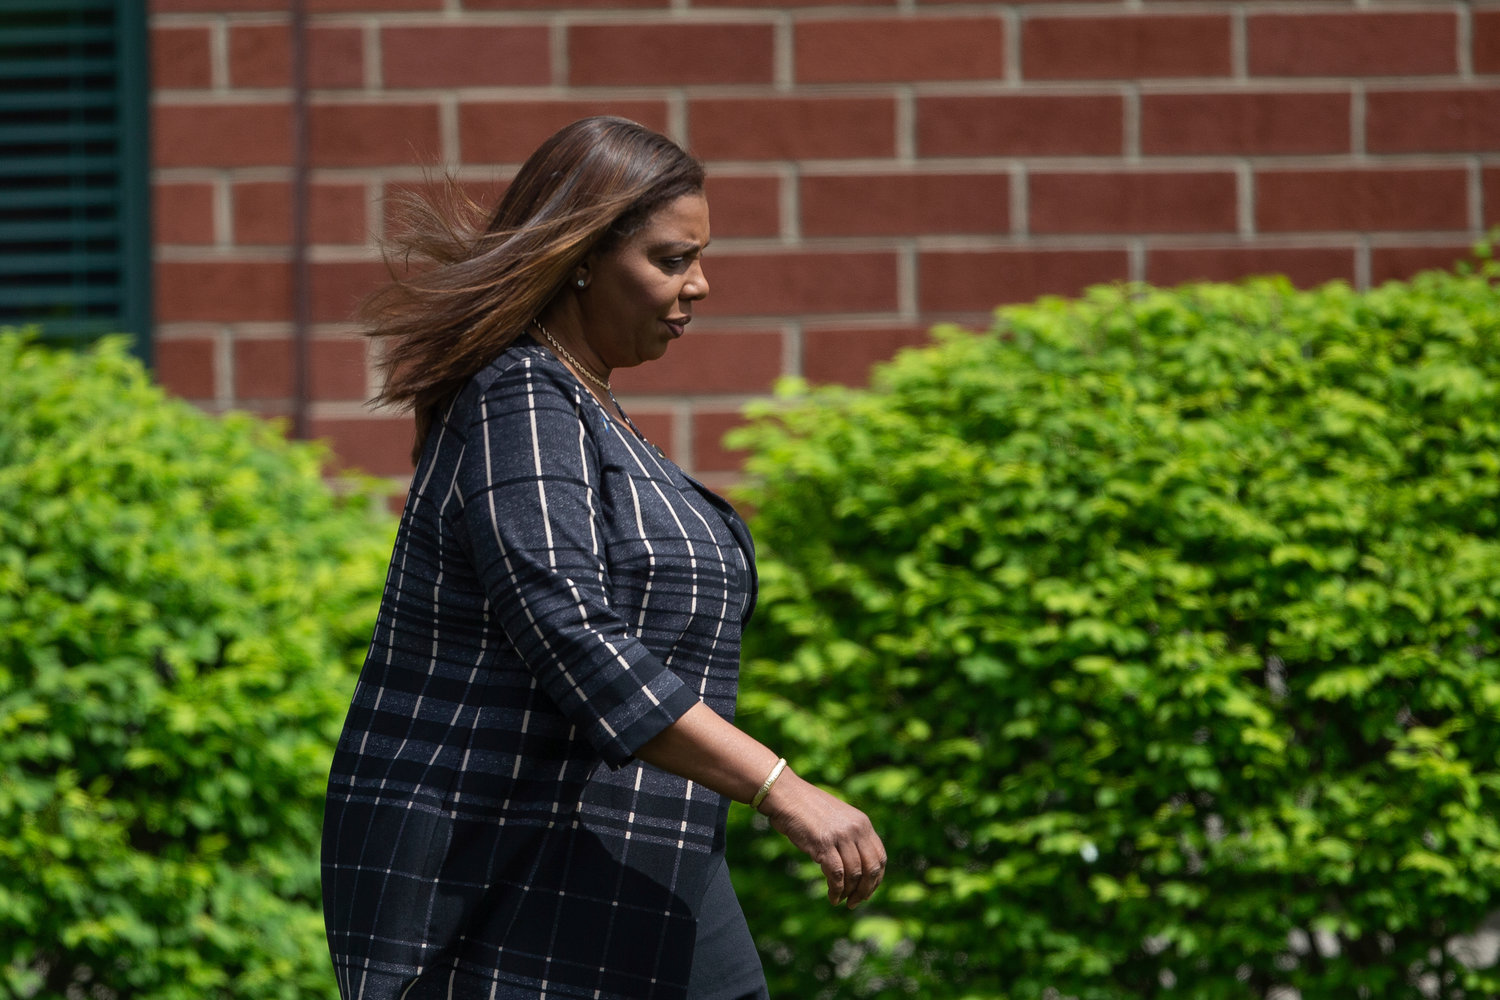 New York Attorney General Letitia James walks to a funeral service for Aaron Salter Jr. at The Chapel at Crosspoint on Wednesday, May 25, 2022, in Getzville, N.Y. Salter Jr. was killed in the Buffalo supermarket shooting on May 14. (AP Photo/Joshua Bessex)